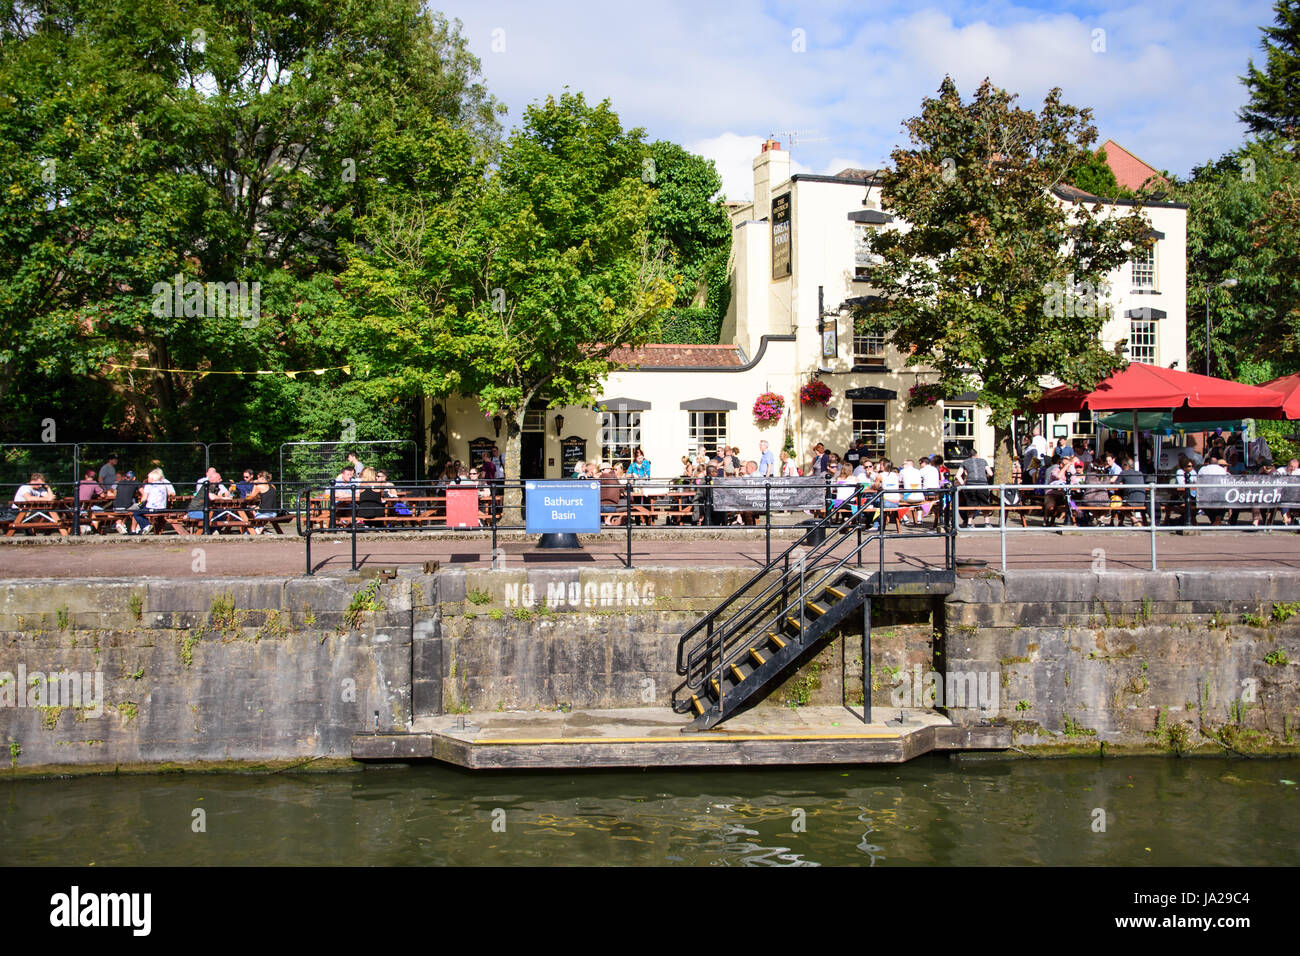 Bristol, England - July 17, 2016: Crowds and customers line the quayside of Bristol's Floating Harbour outside the Ostrich pub. Stock Photo